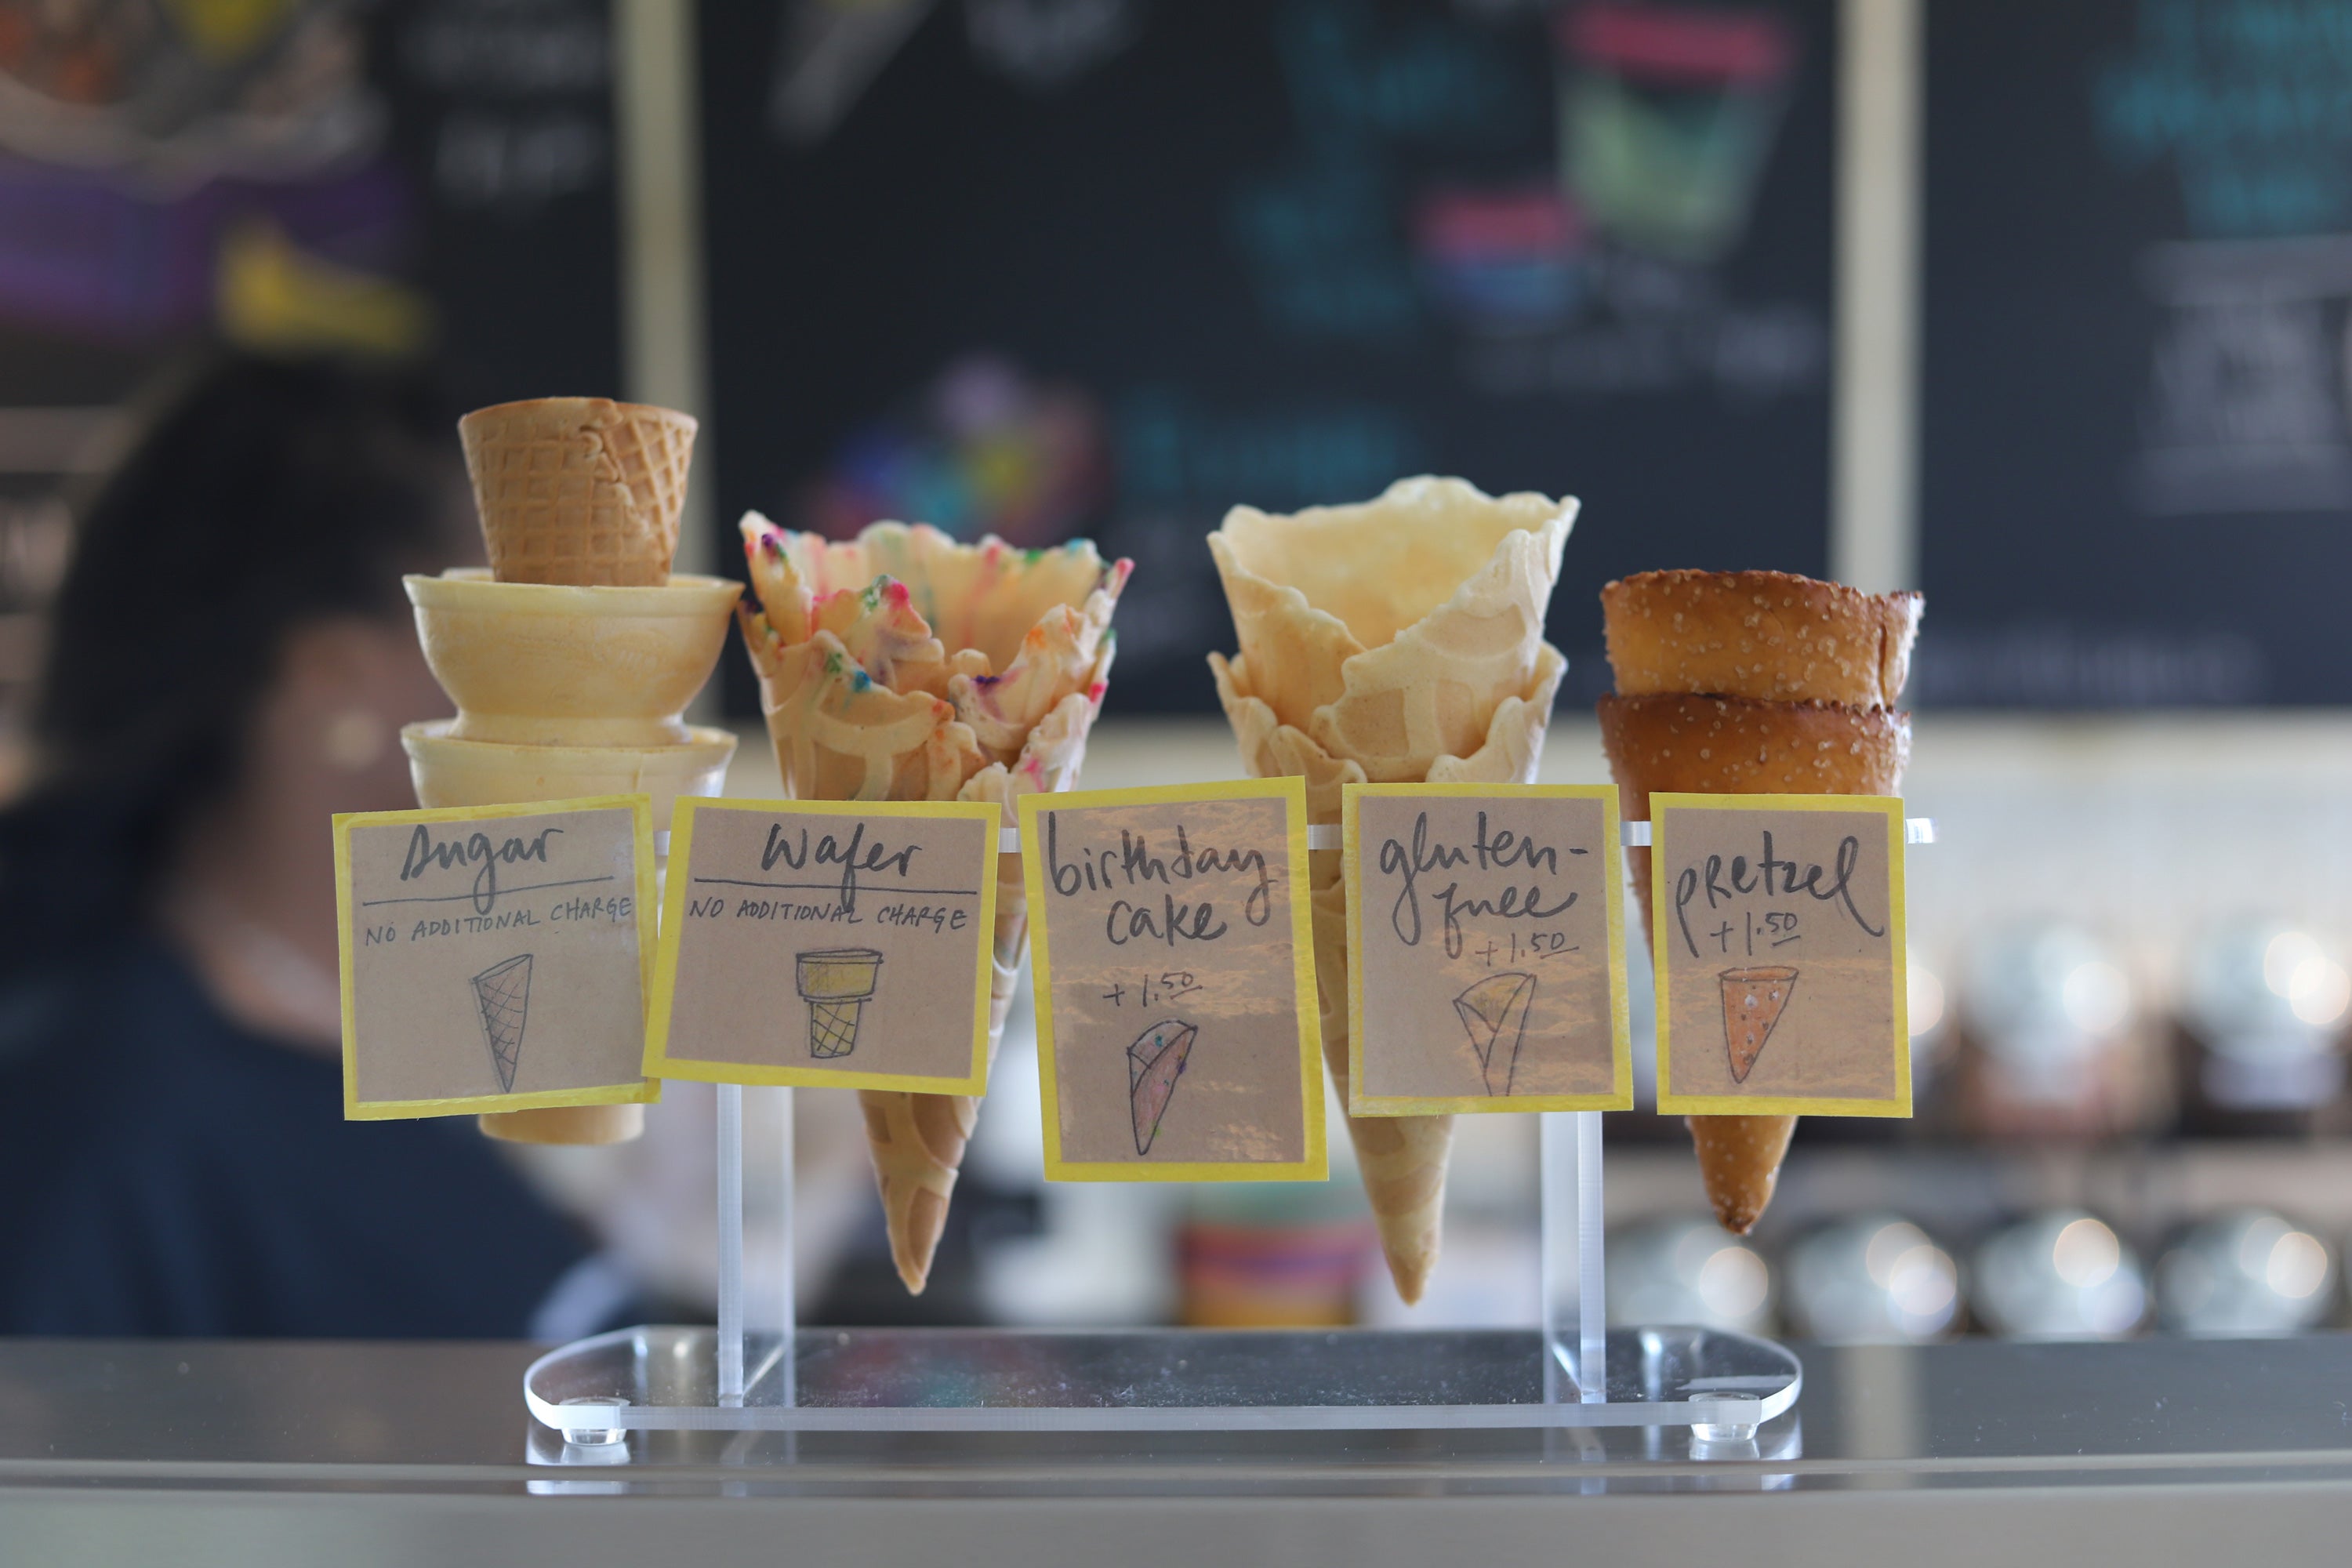 a-stack-of-cones-sugar-wafer-specialty-gluten-free-and-pretzel-in